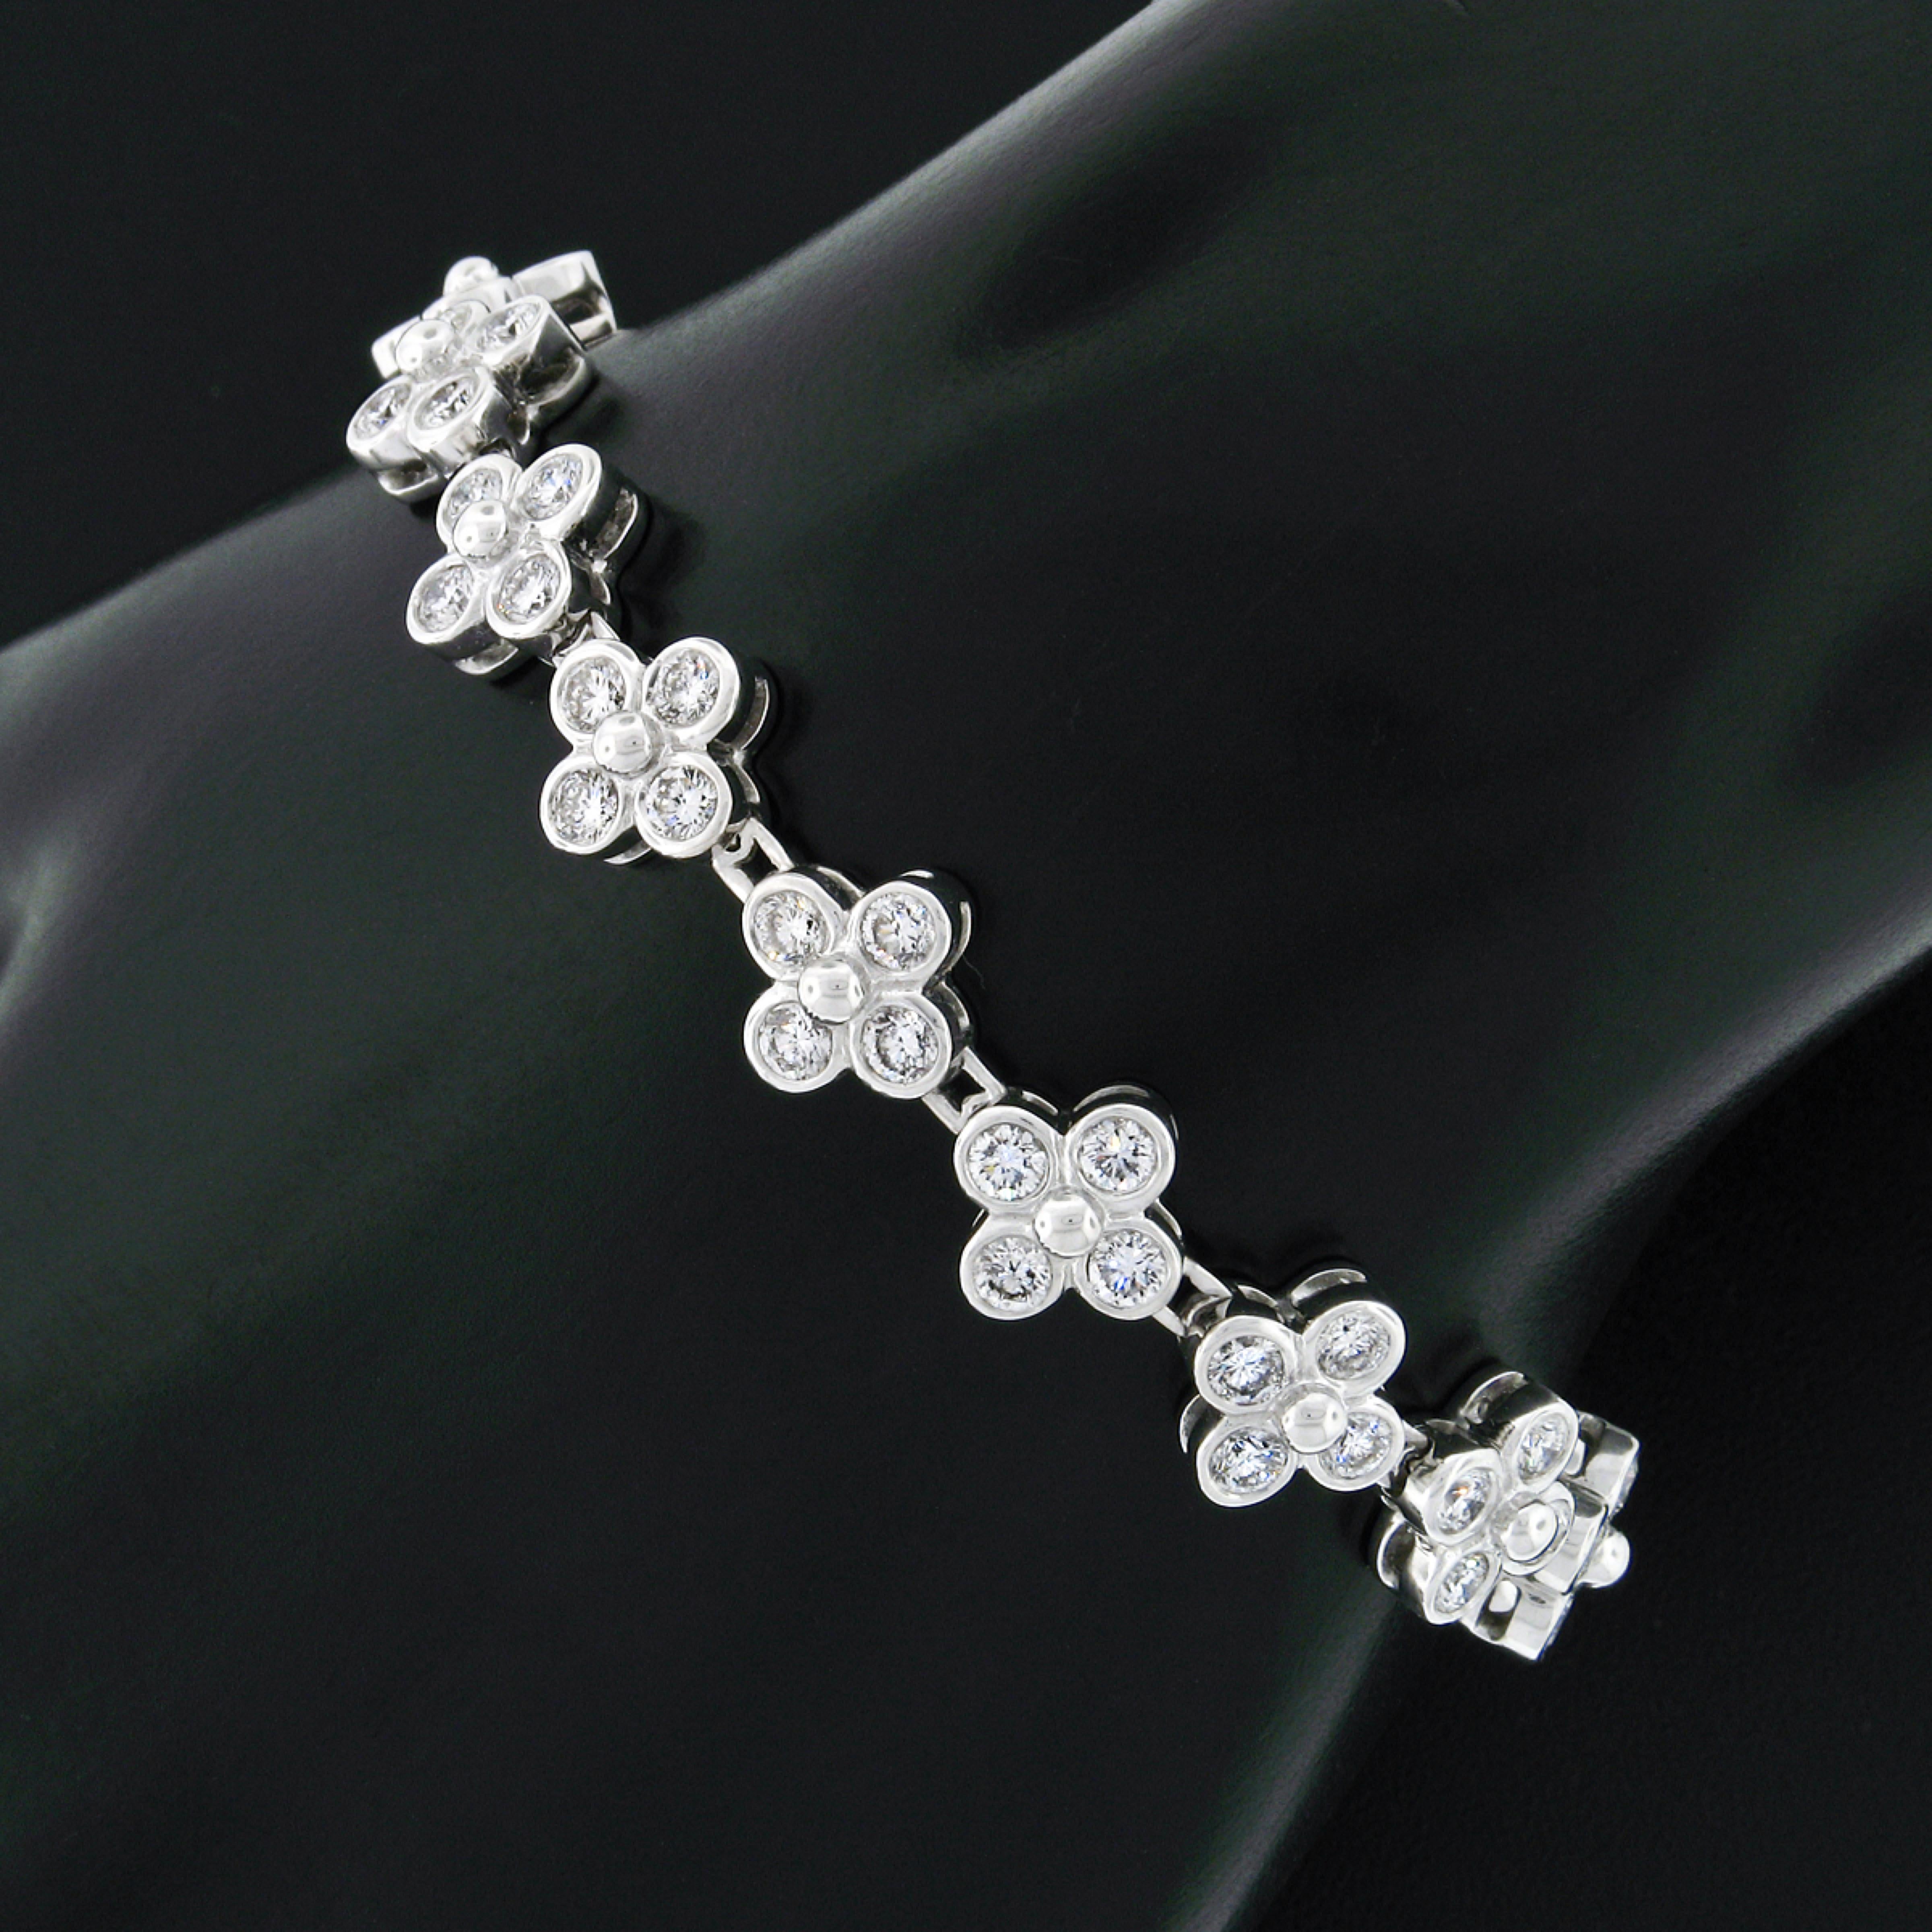 You are looking at a stunning and very well made diamond tennis bracelet crafted in solid 18k white gold and drenched with very fine quality diamonds throughout. The bracelet is constructed from solidly made, quatrefoil design settings that are each